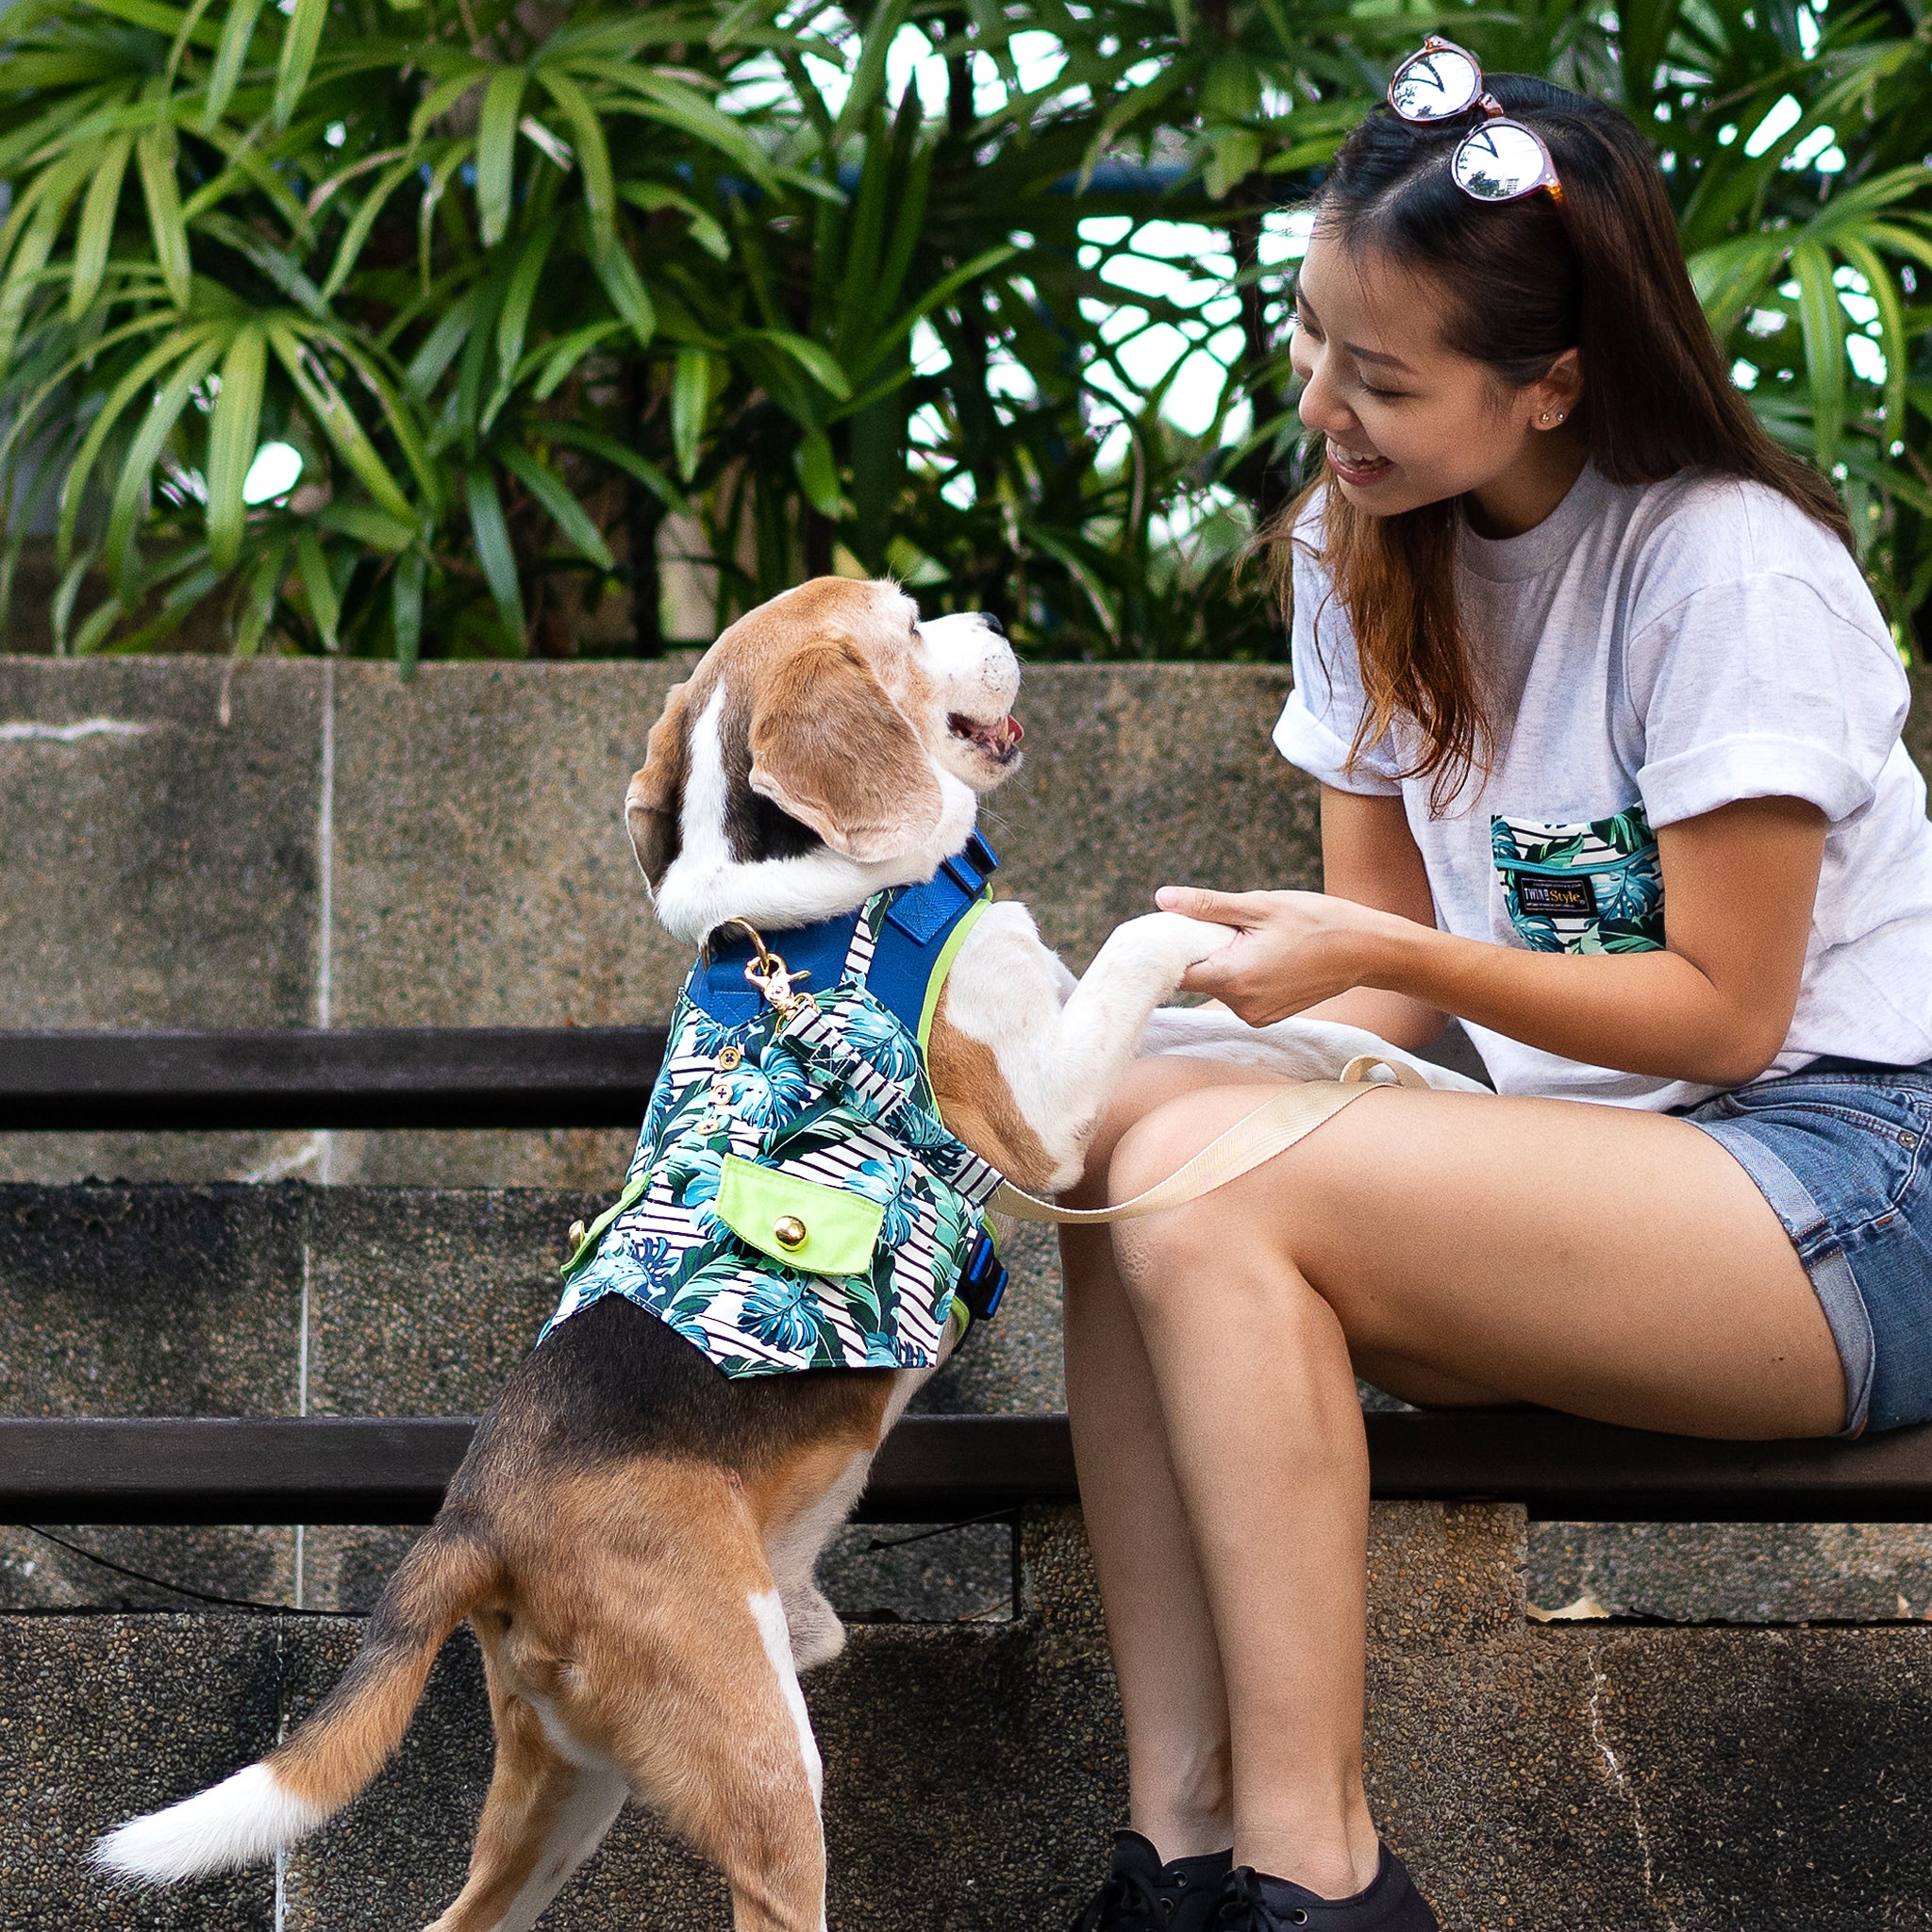 Tropical Leaves Matching T Shirt by Twin In Style (Unisex) - The Pet's Couture